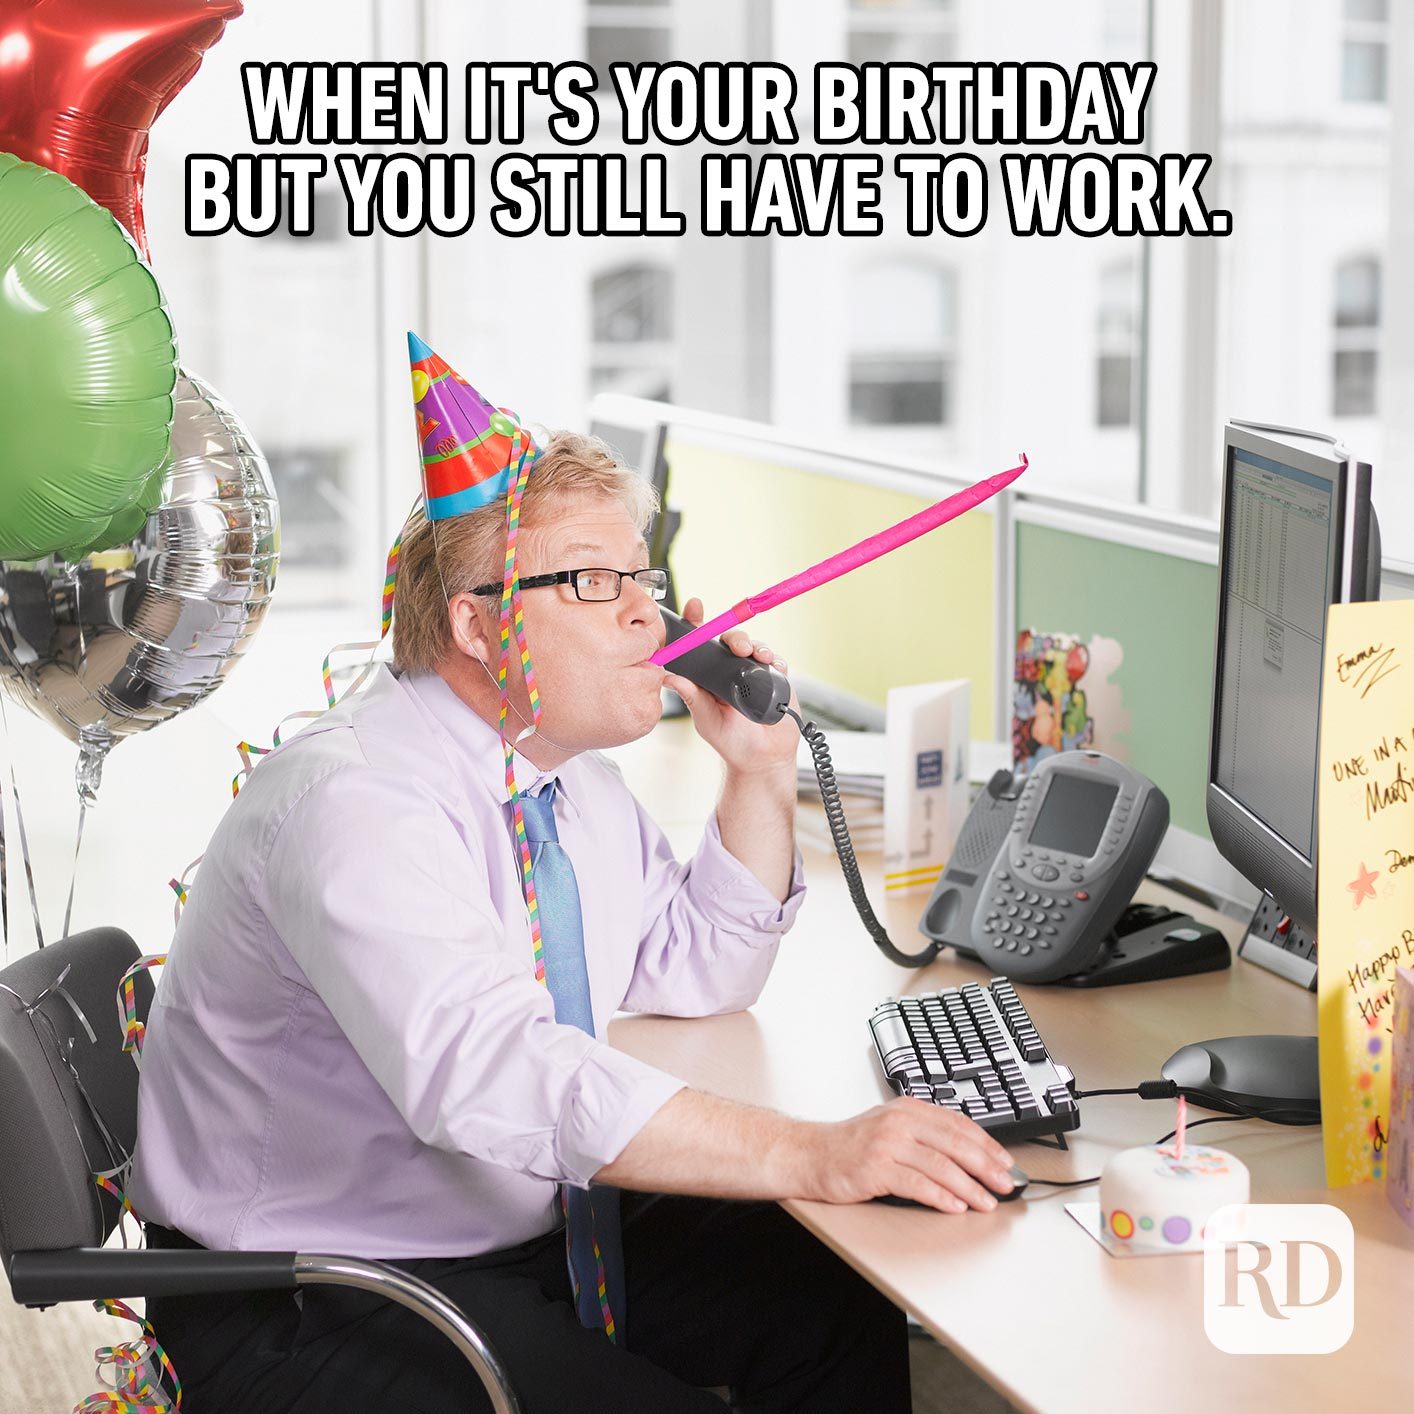 When it's your birthday but you still have to work.